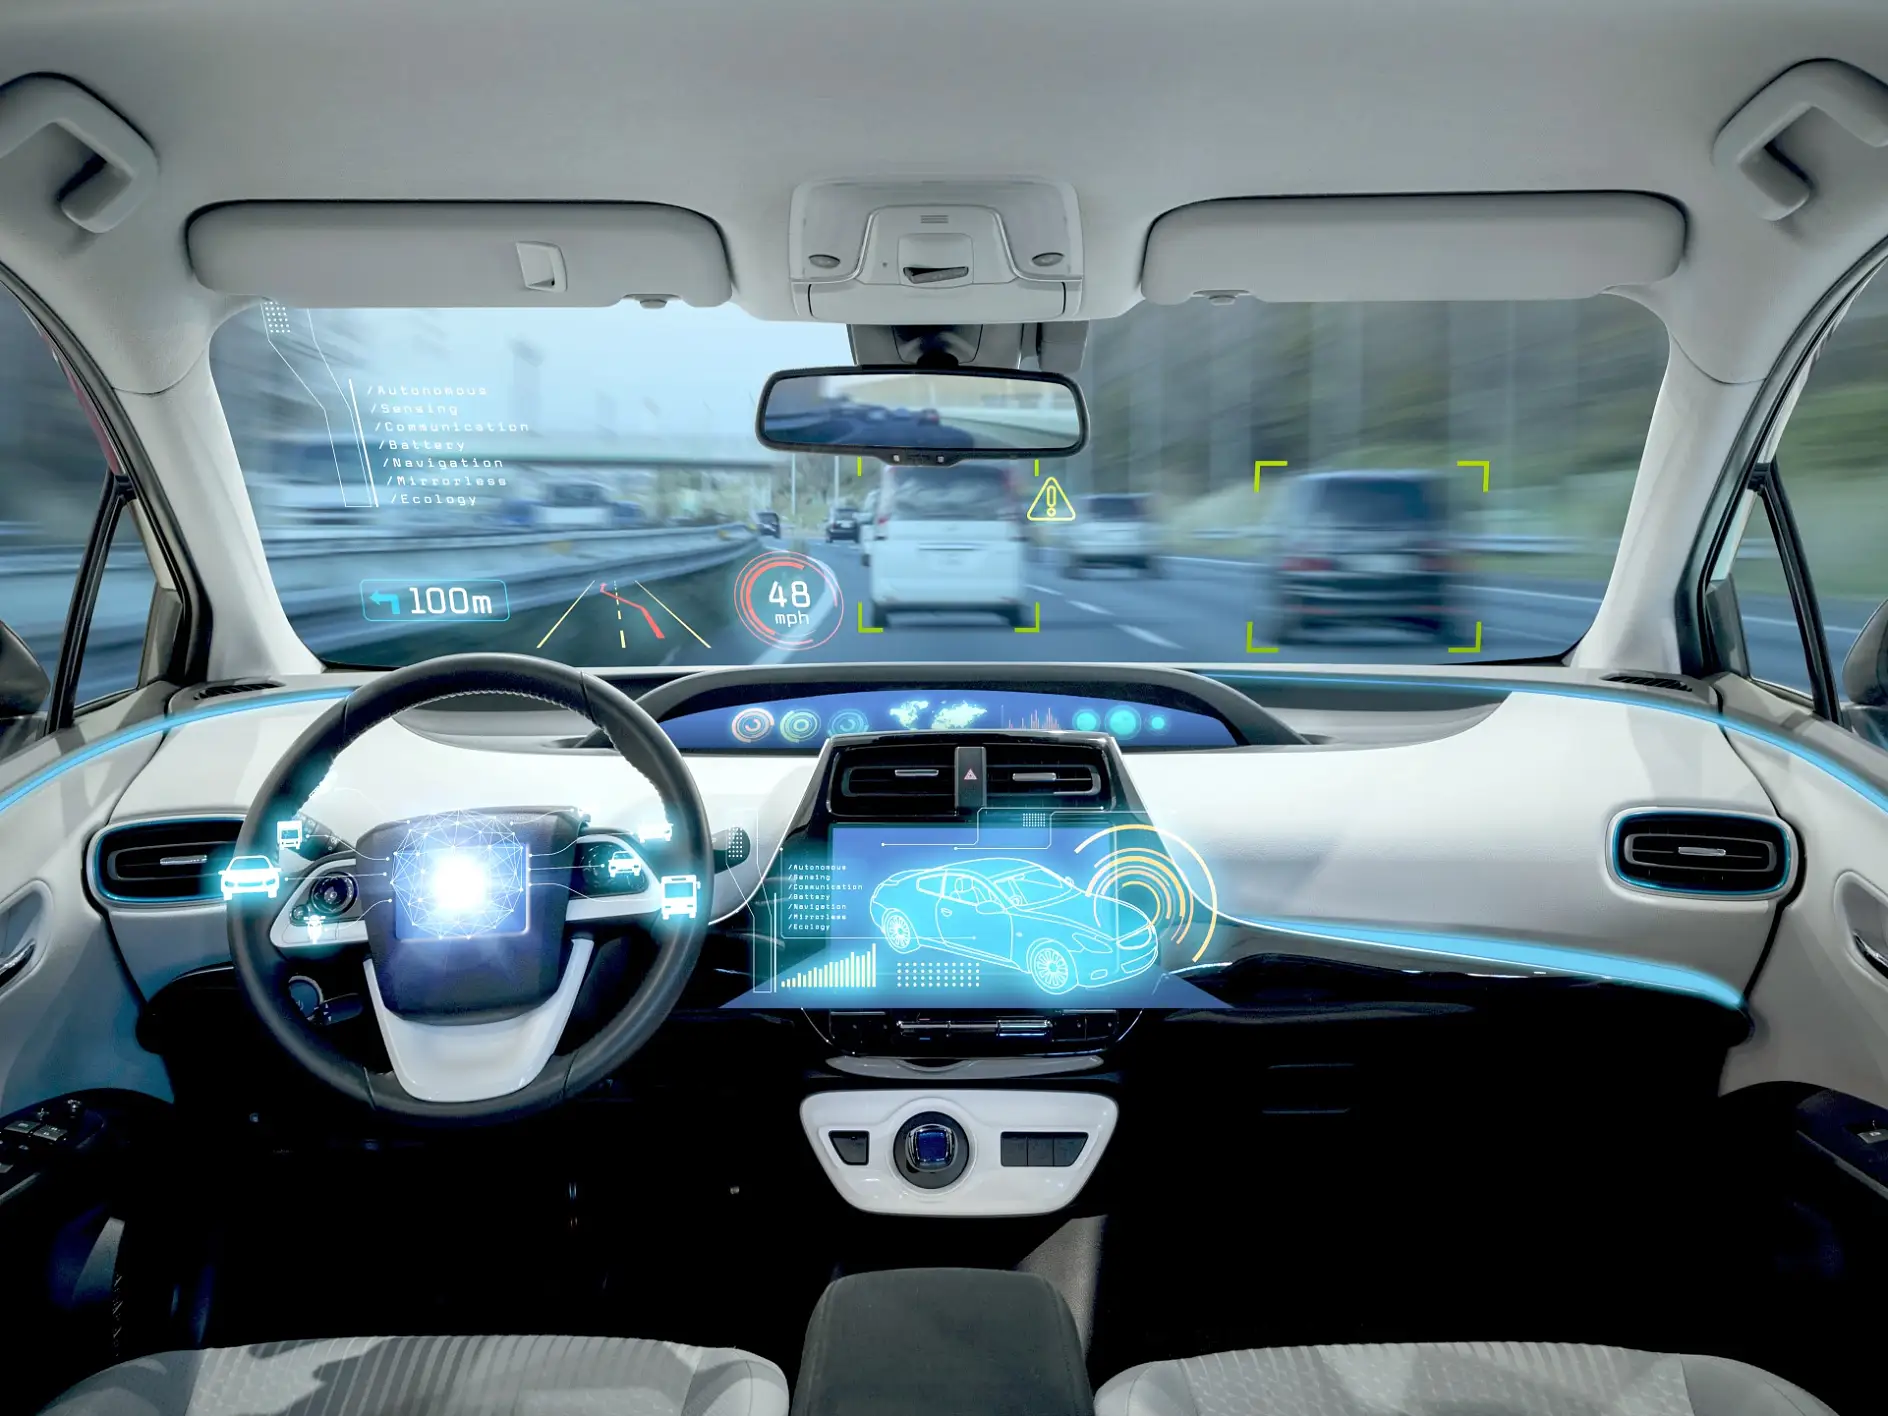 Automotive Electronics for the car of the future